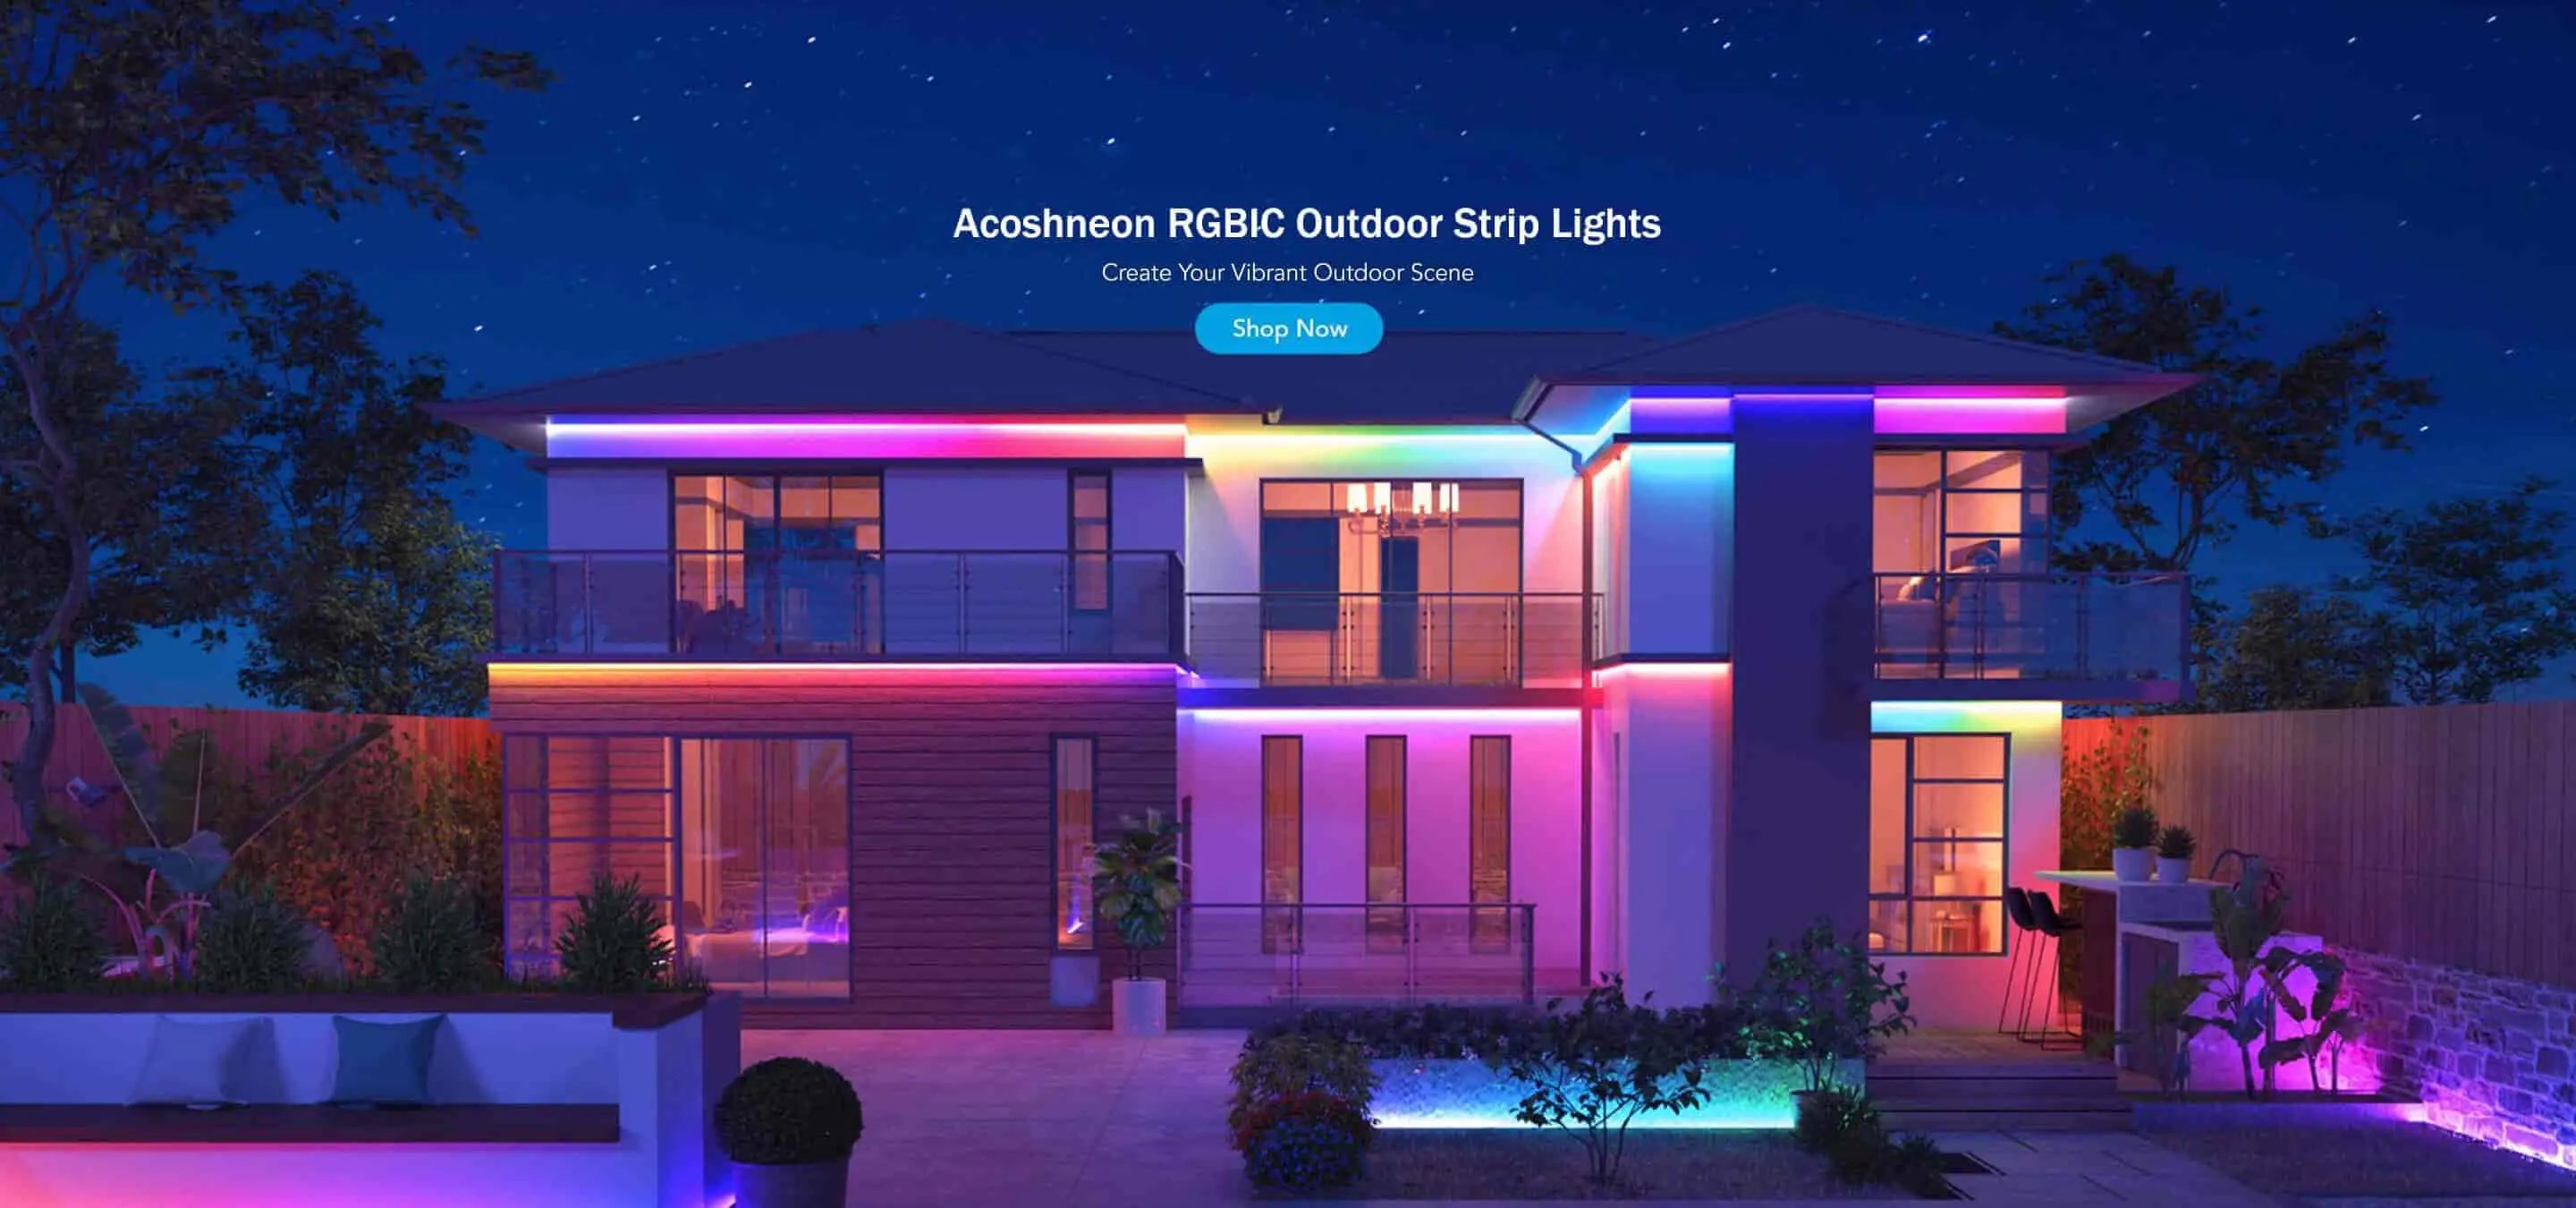 Outdoor house installed RGBIC led strip lights, make it look more vivid and vibrant.